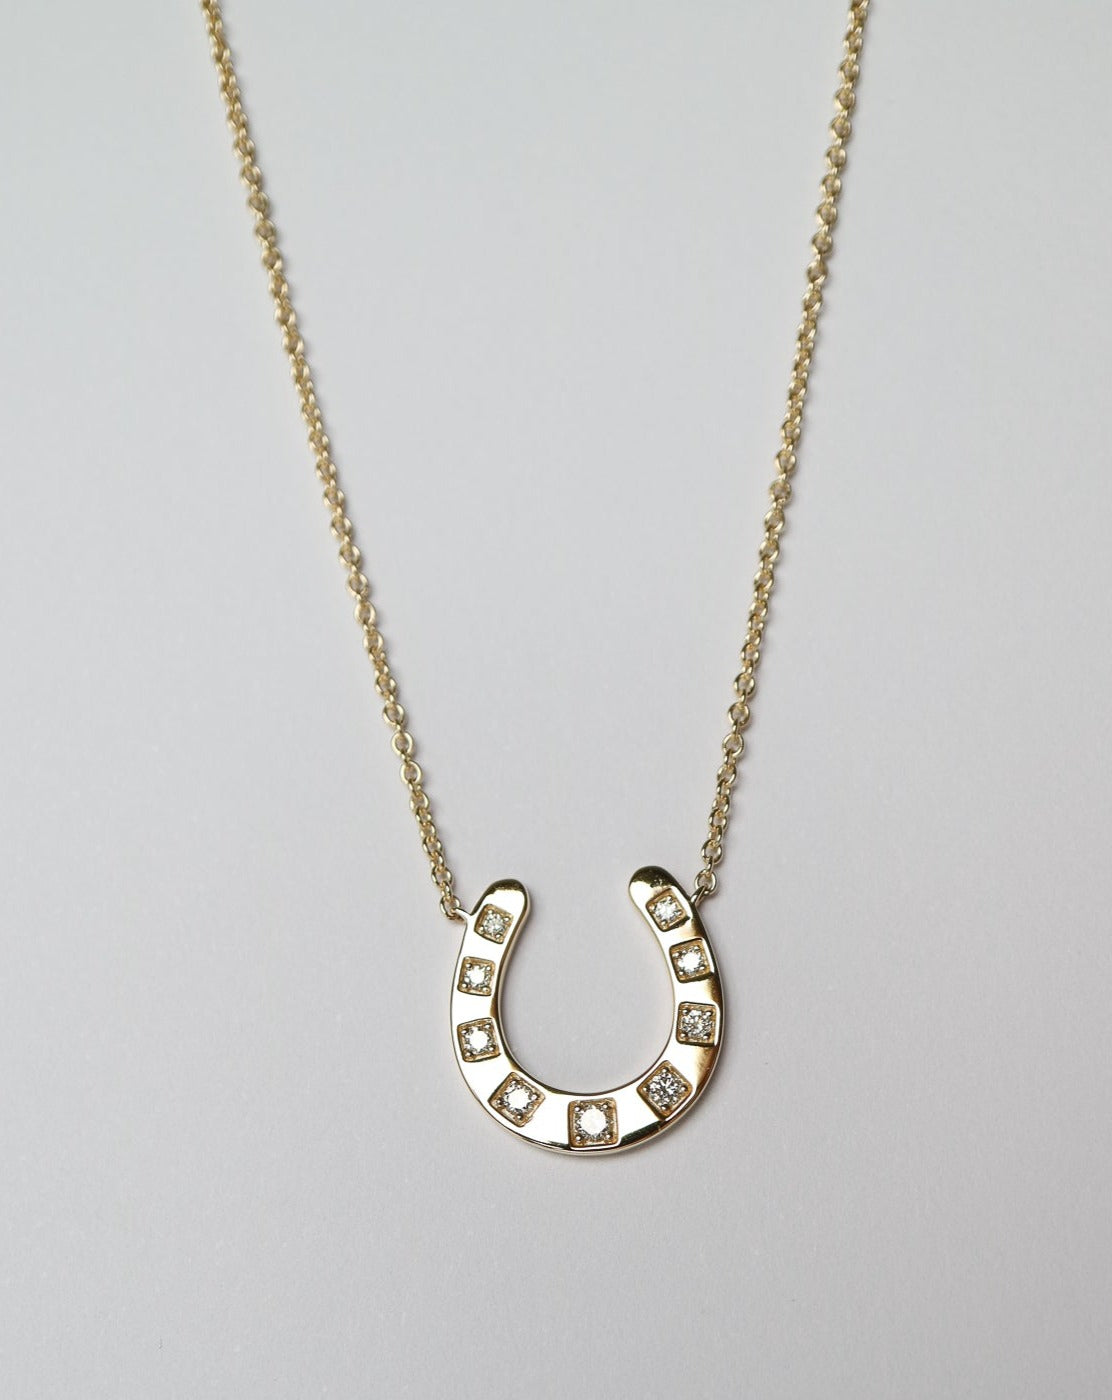 9kt gold and lab grown diamond horseshoe luck pendant necklace